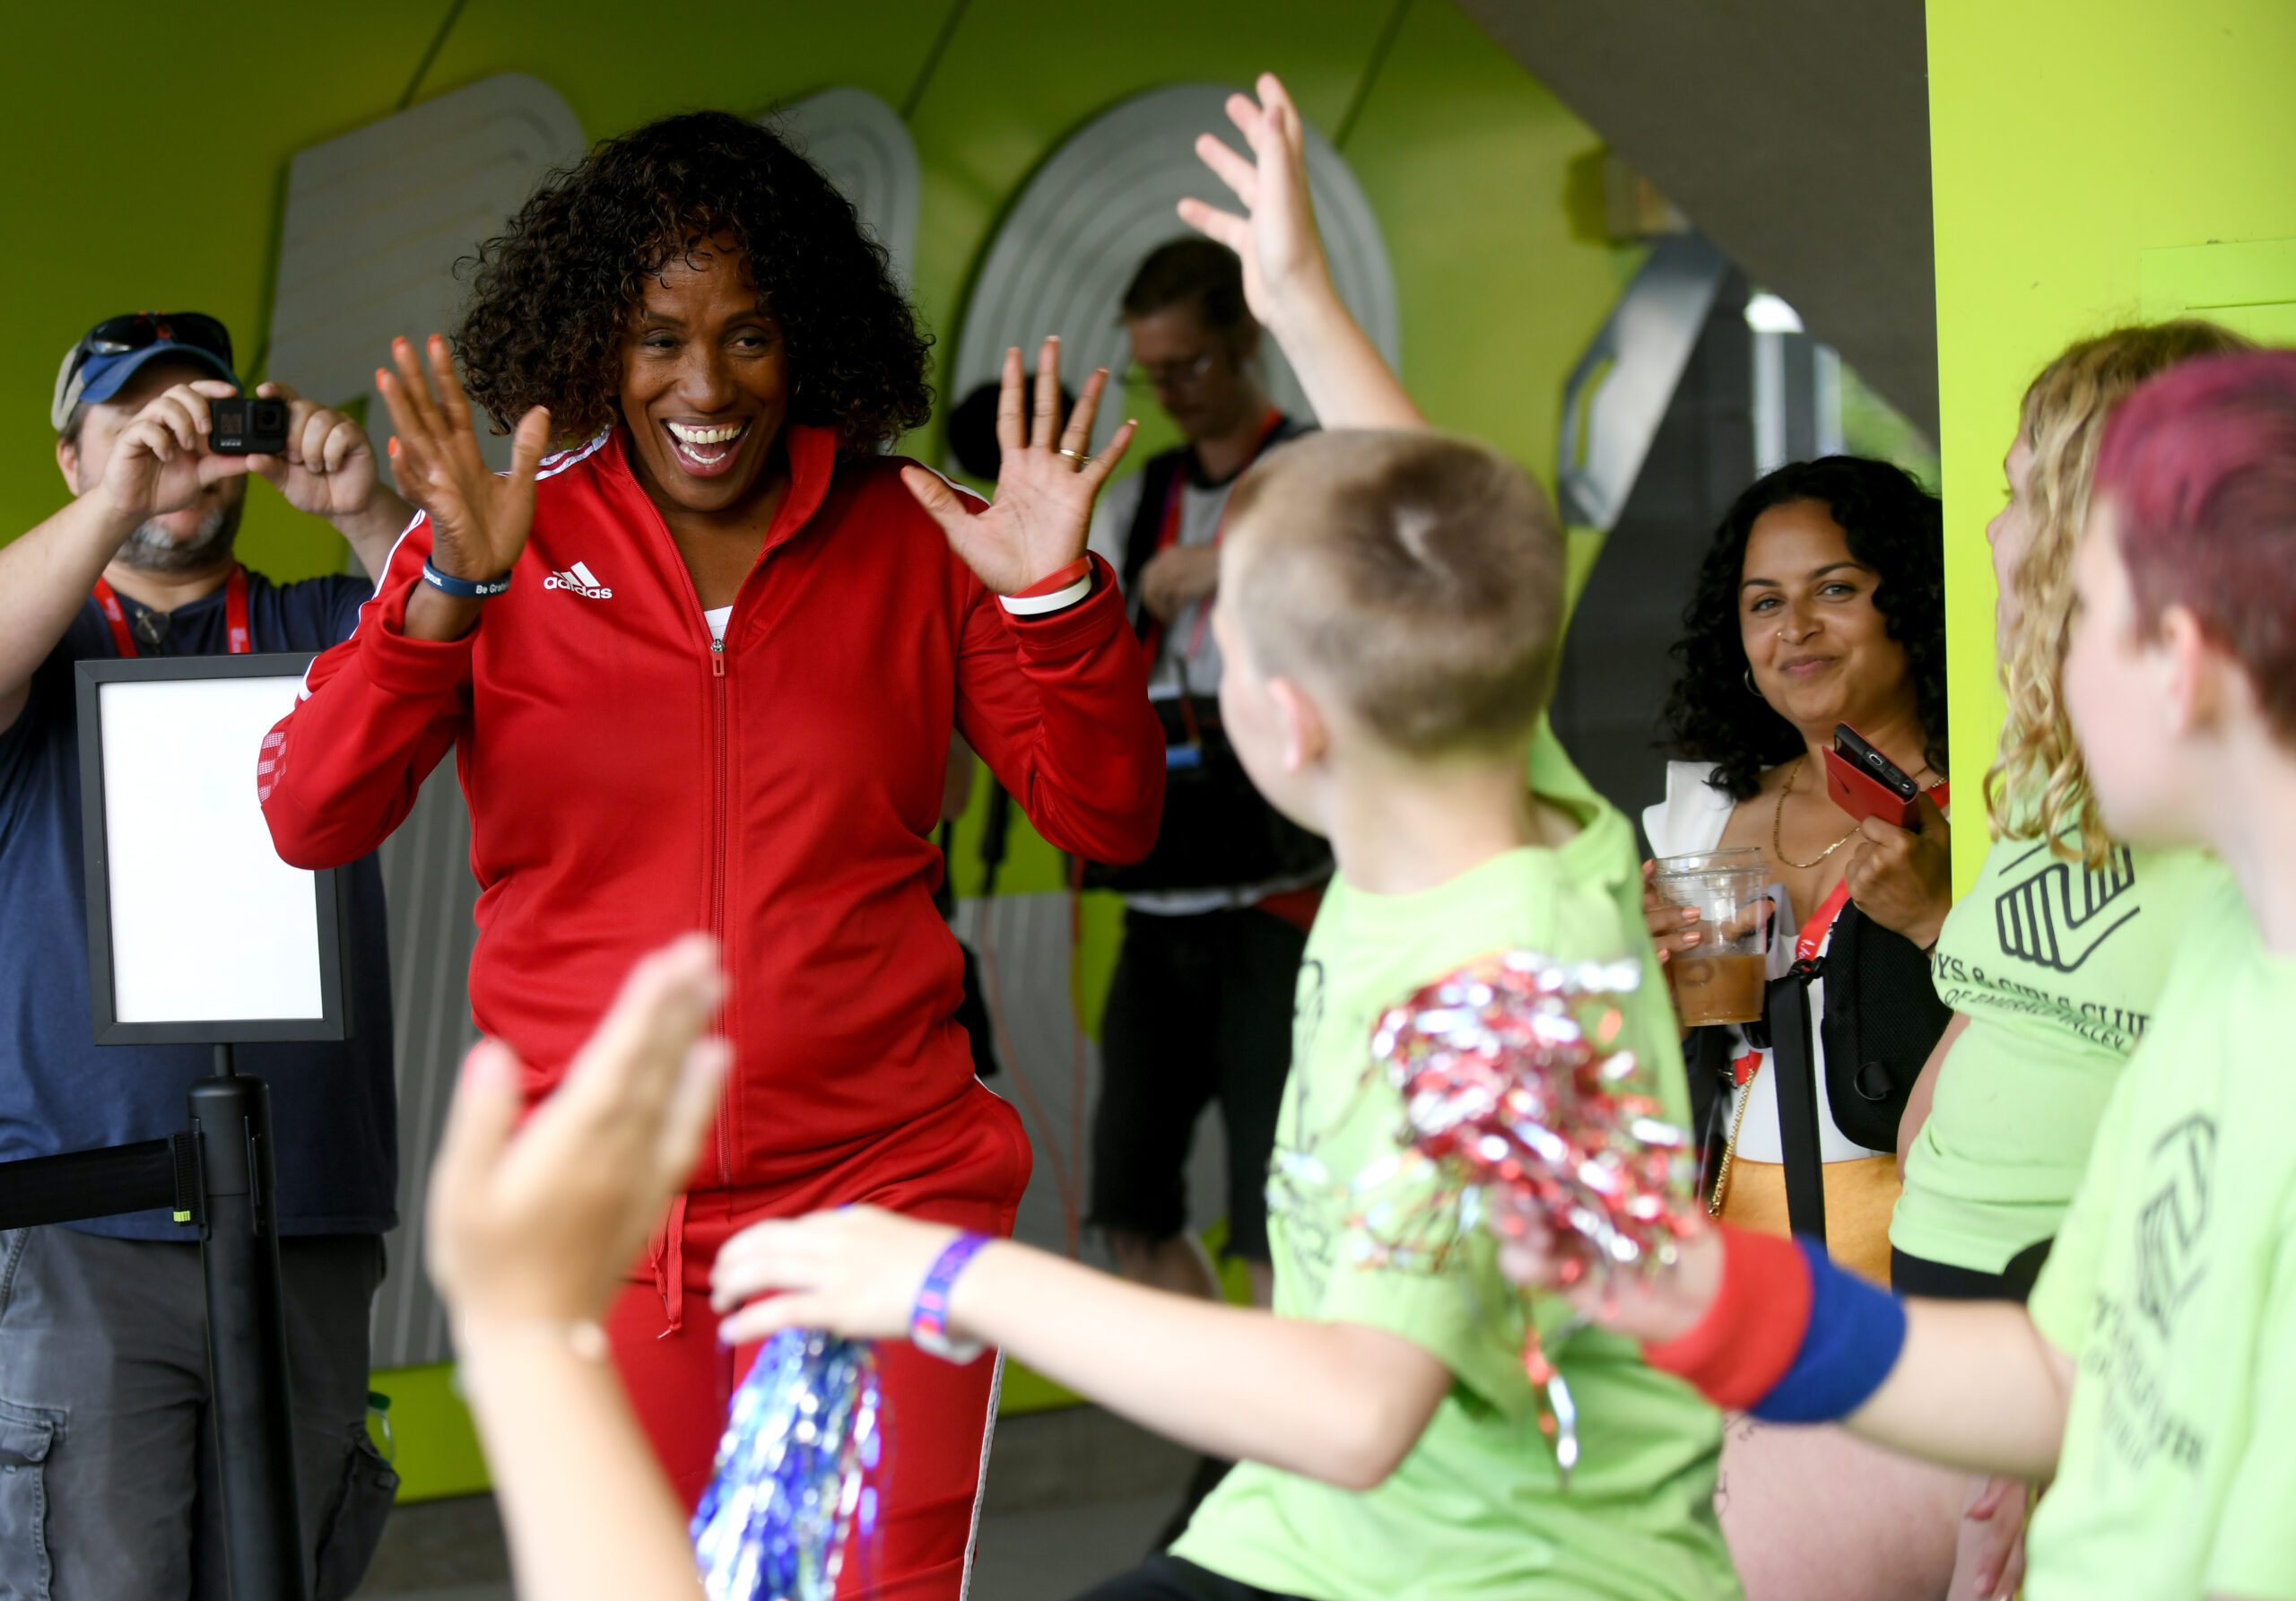 Comcast Partners with U.S. Olympic Gold Medalist, Jackie Joyner-Kersee to Inspire the Team of Tomorrow